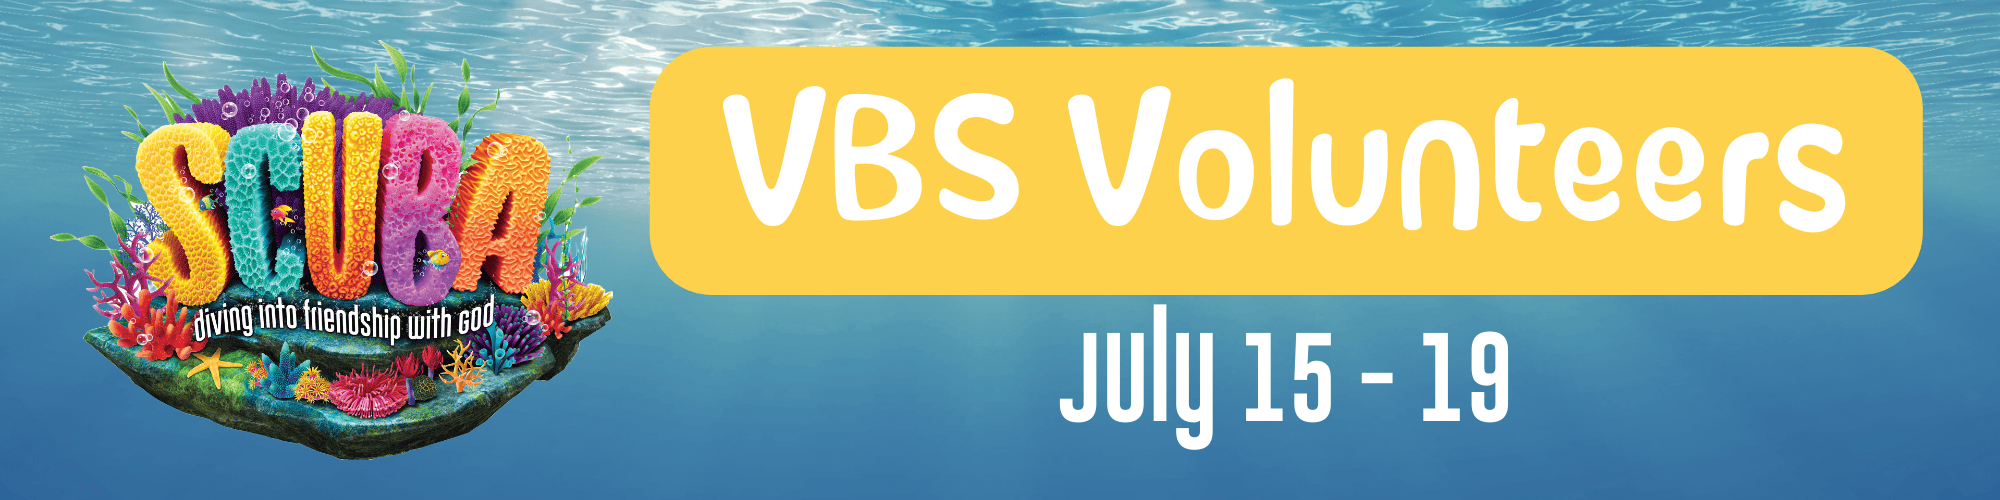 VBS Email Banner (700 × 250) (2000 x 500 px) (1)